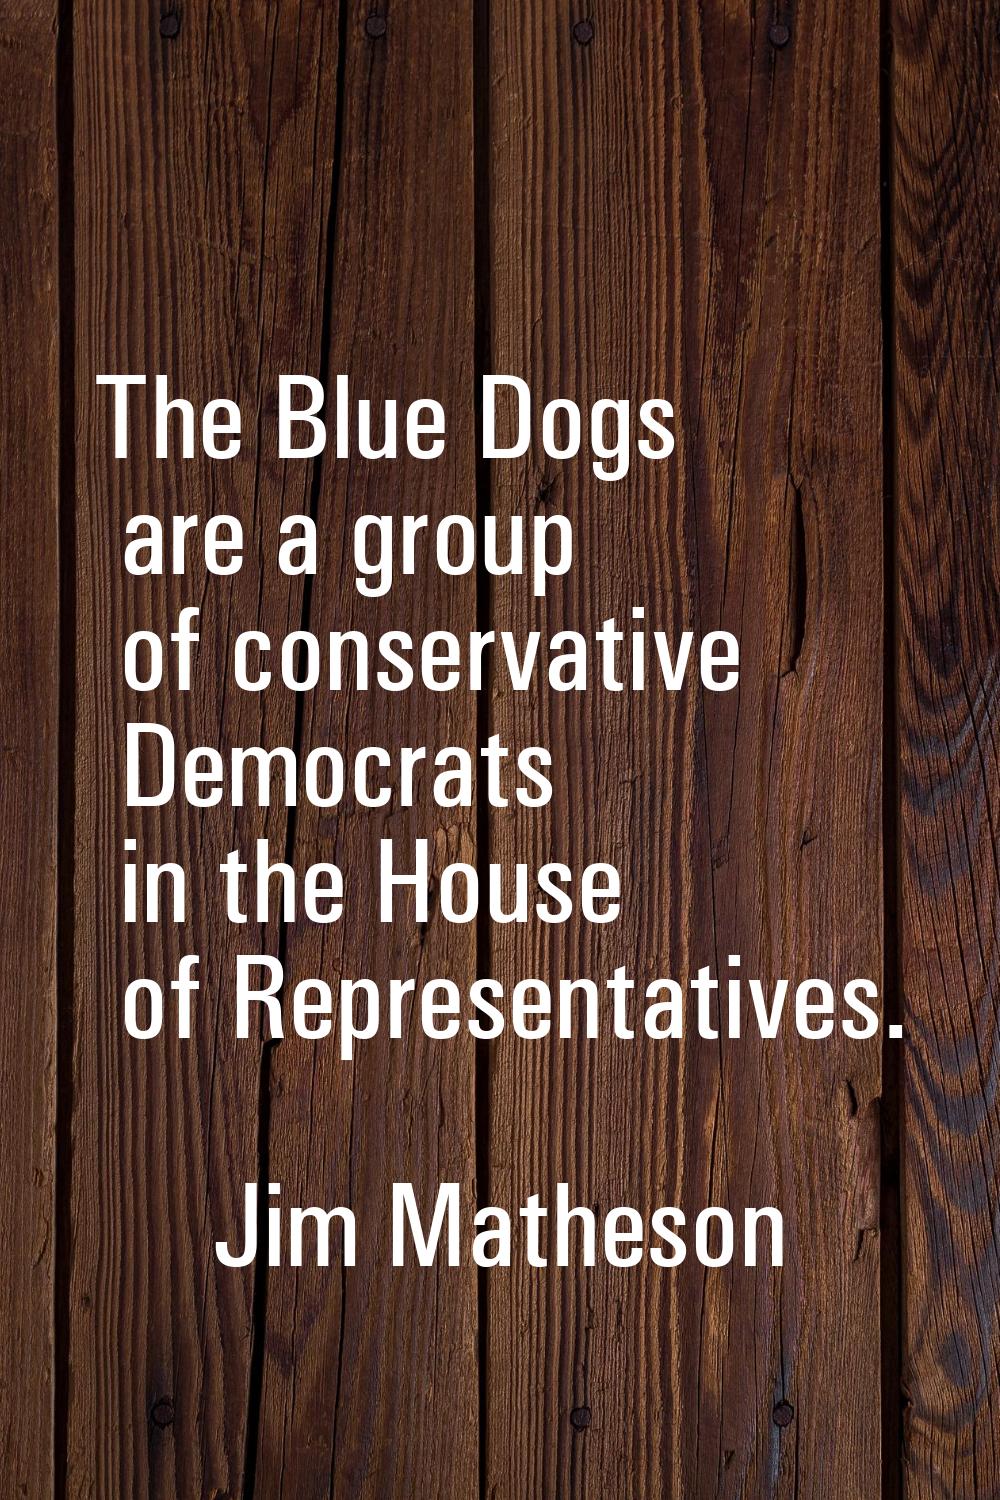 The Blue Dogs are a group of conservative Democrats in the House of Representatives.